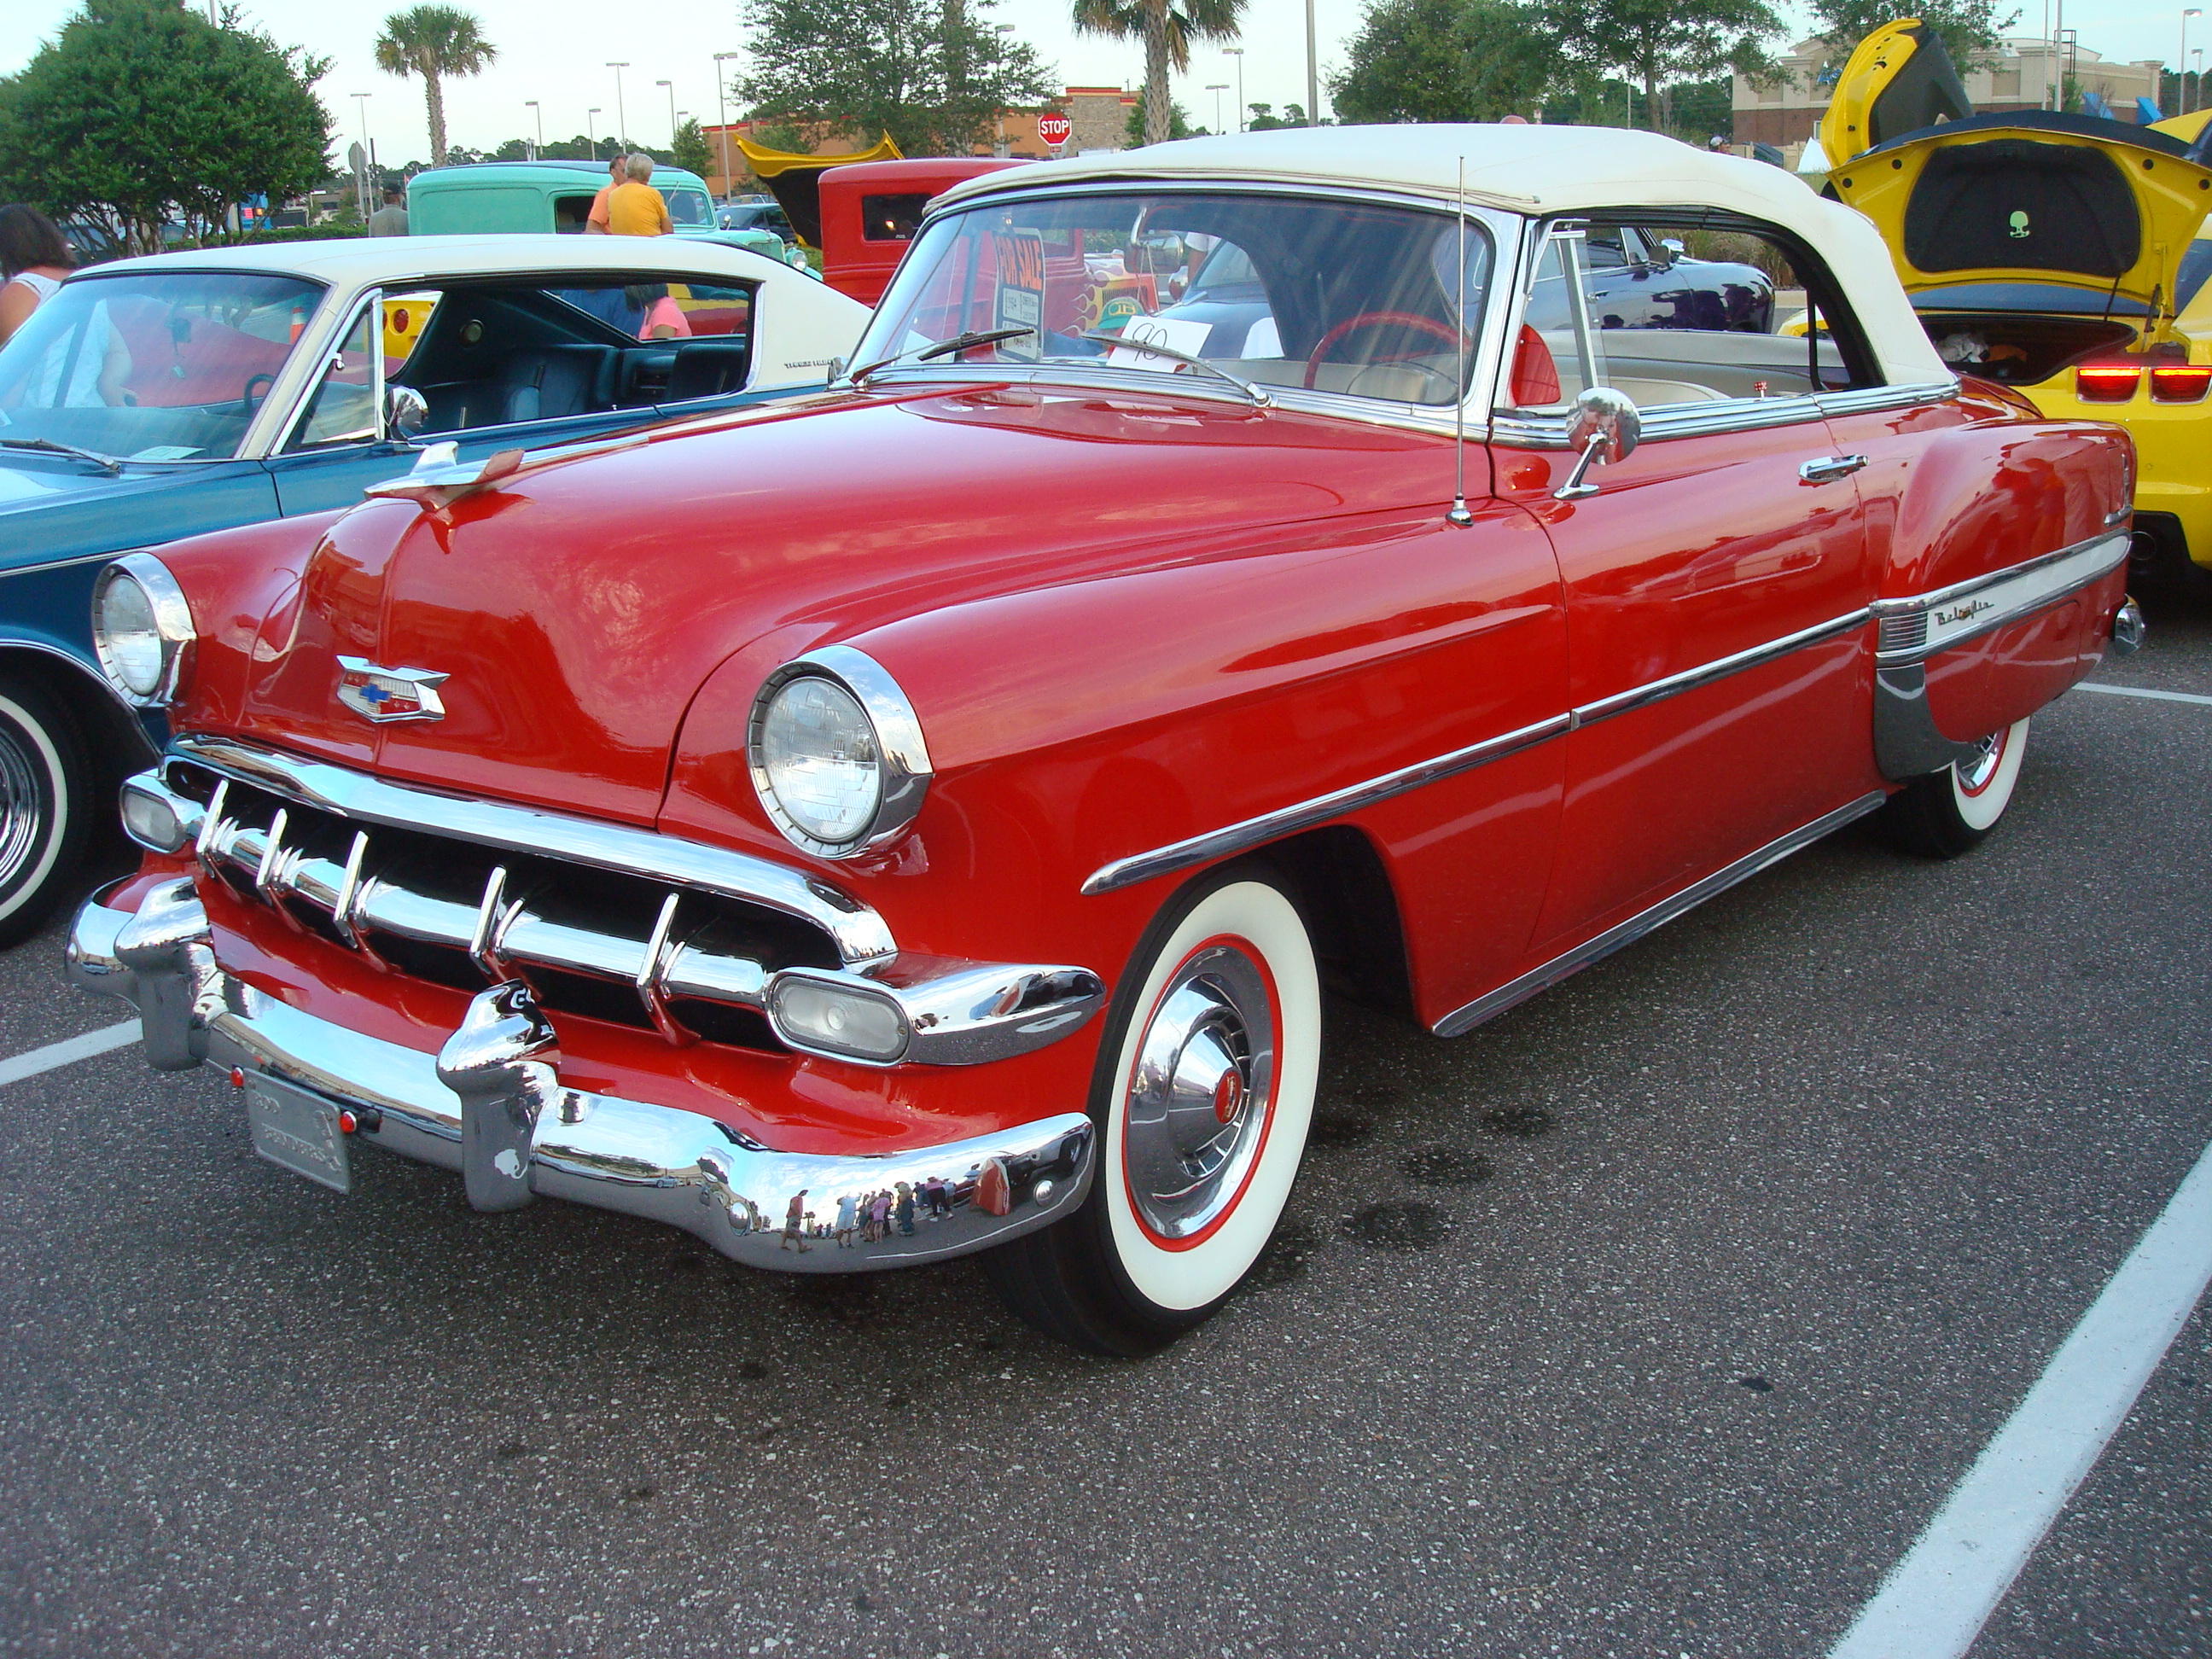 Dick's 1954 Chevy Convertible